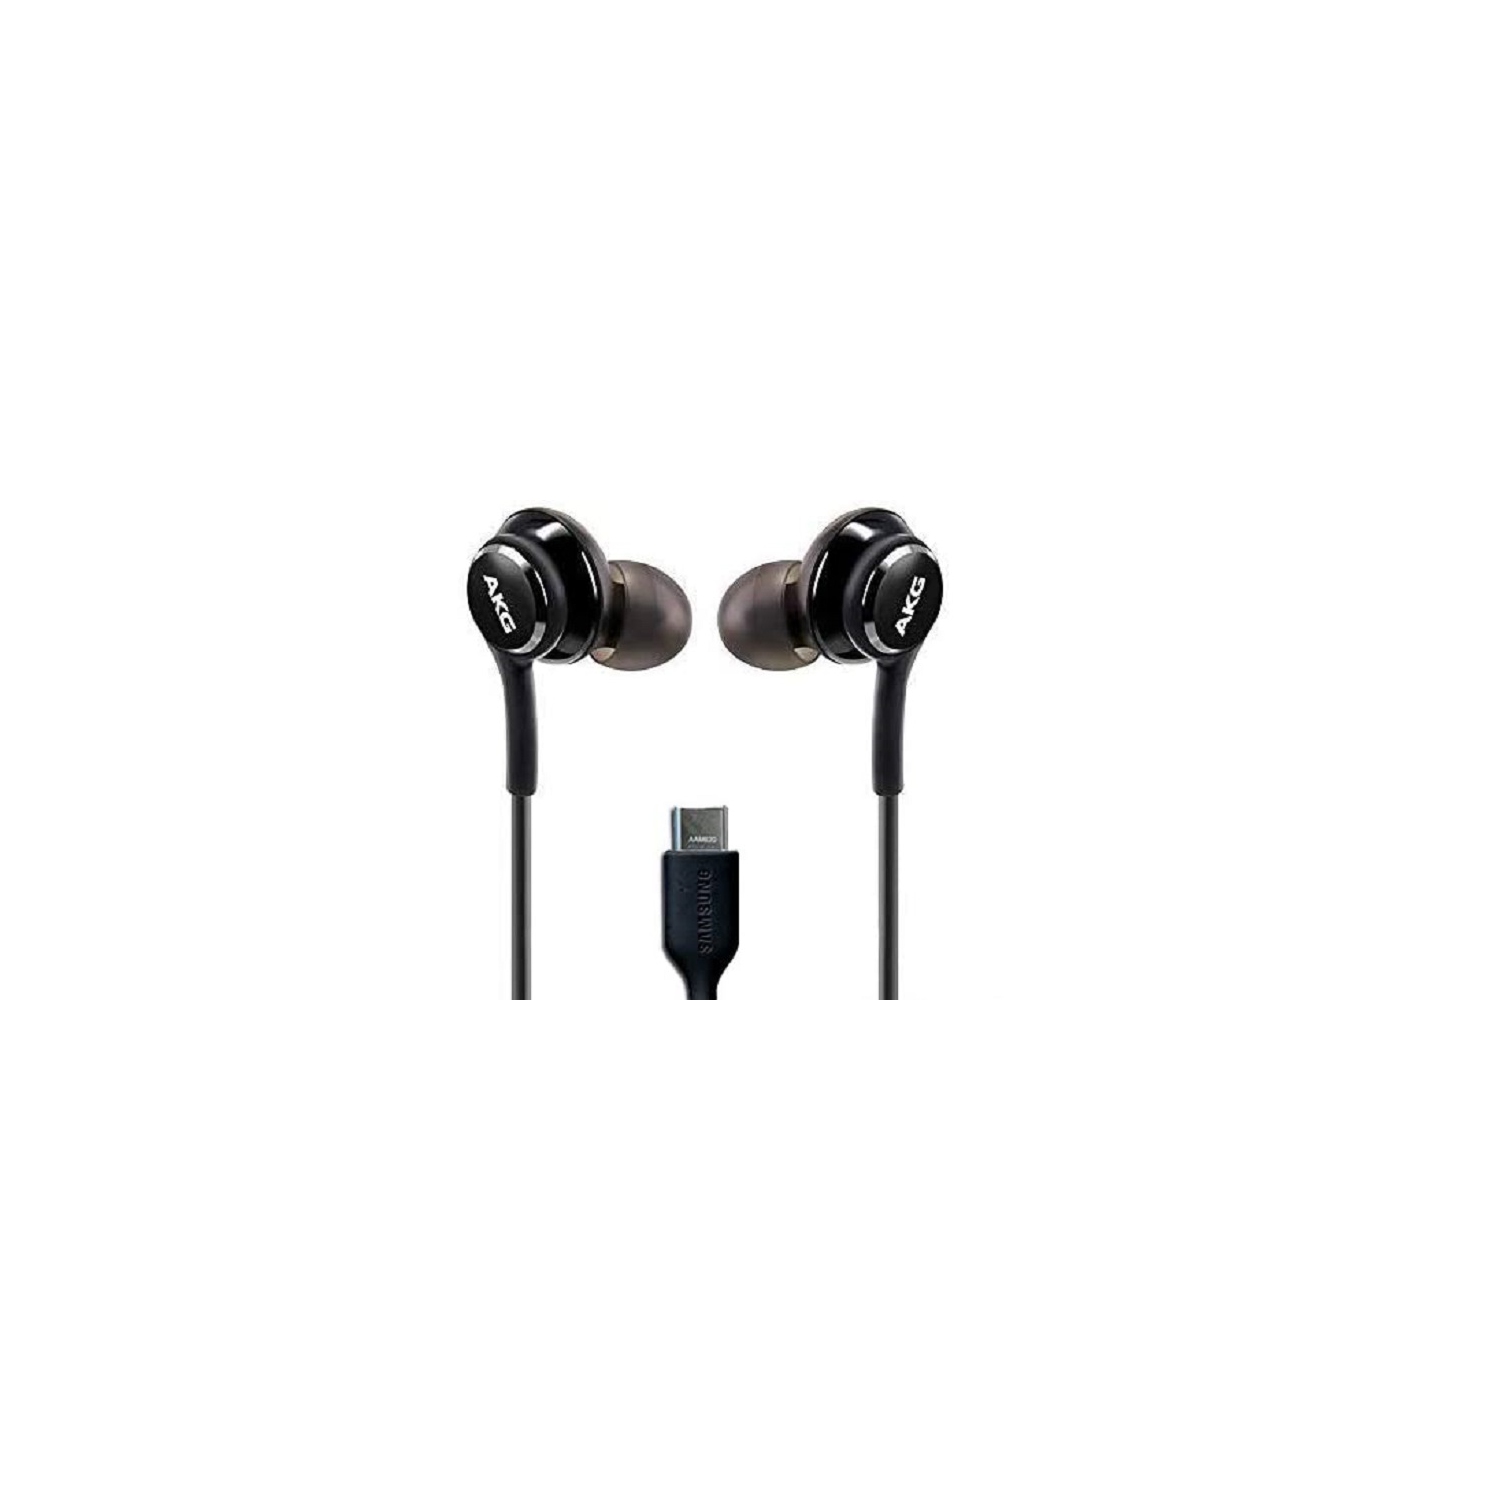 (2pack) Samsung Galaxy Stereo Headphones Note 10 Note 10+ S10 Plus S9 Note 8 S9+ S10e S10 with Type-C jack- Designed by AKG - with Microphone (Black) USB-C Connector